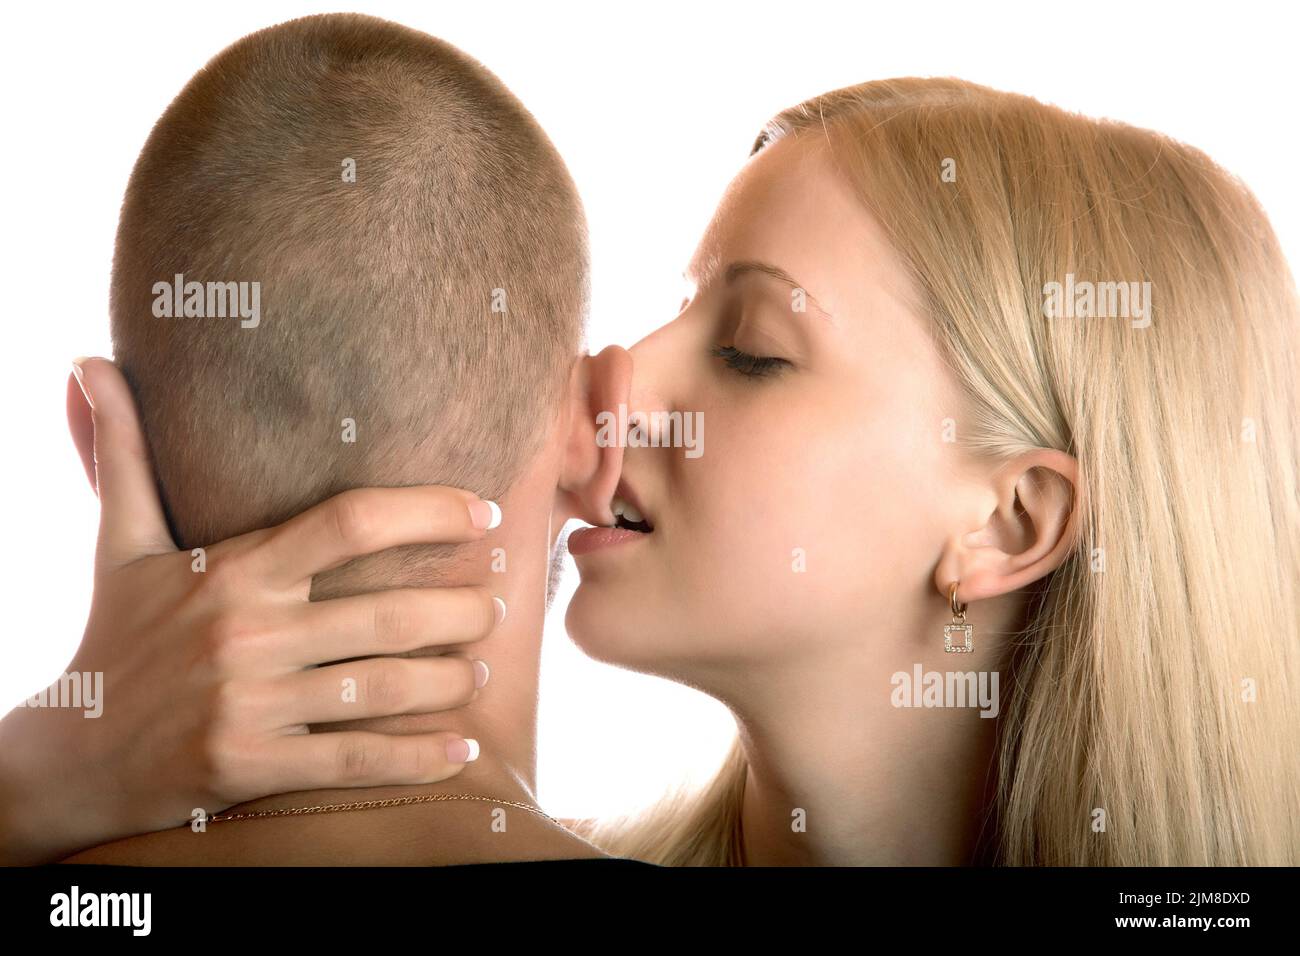 The girl bites an ear of the young man Stock Photo